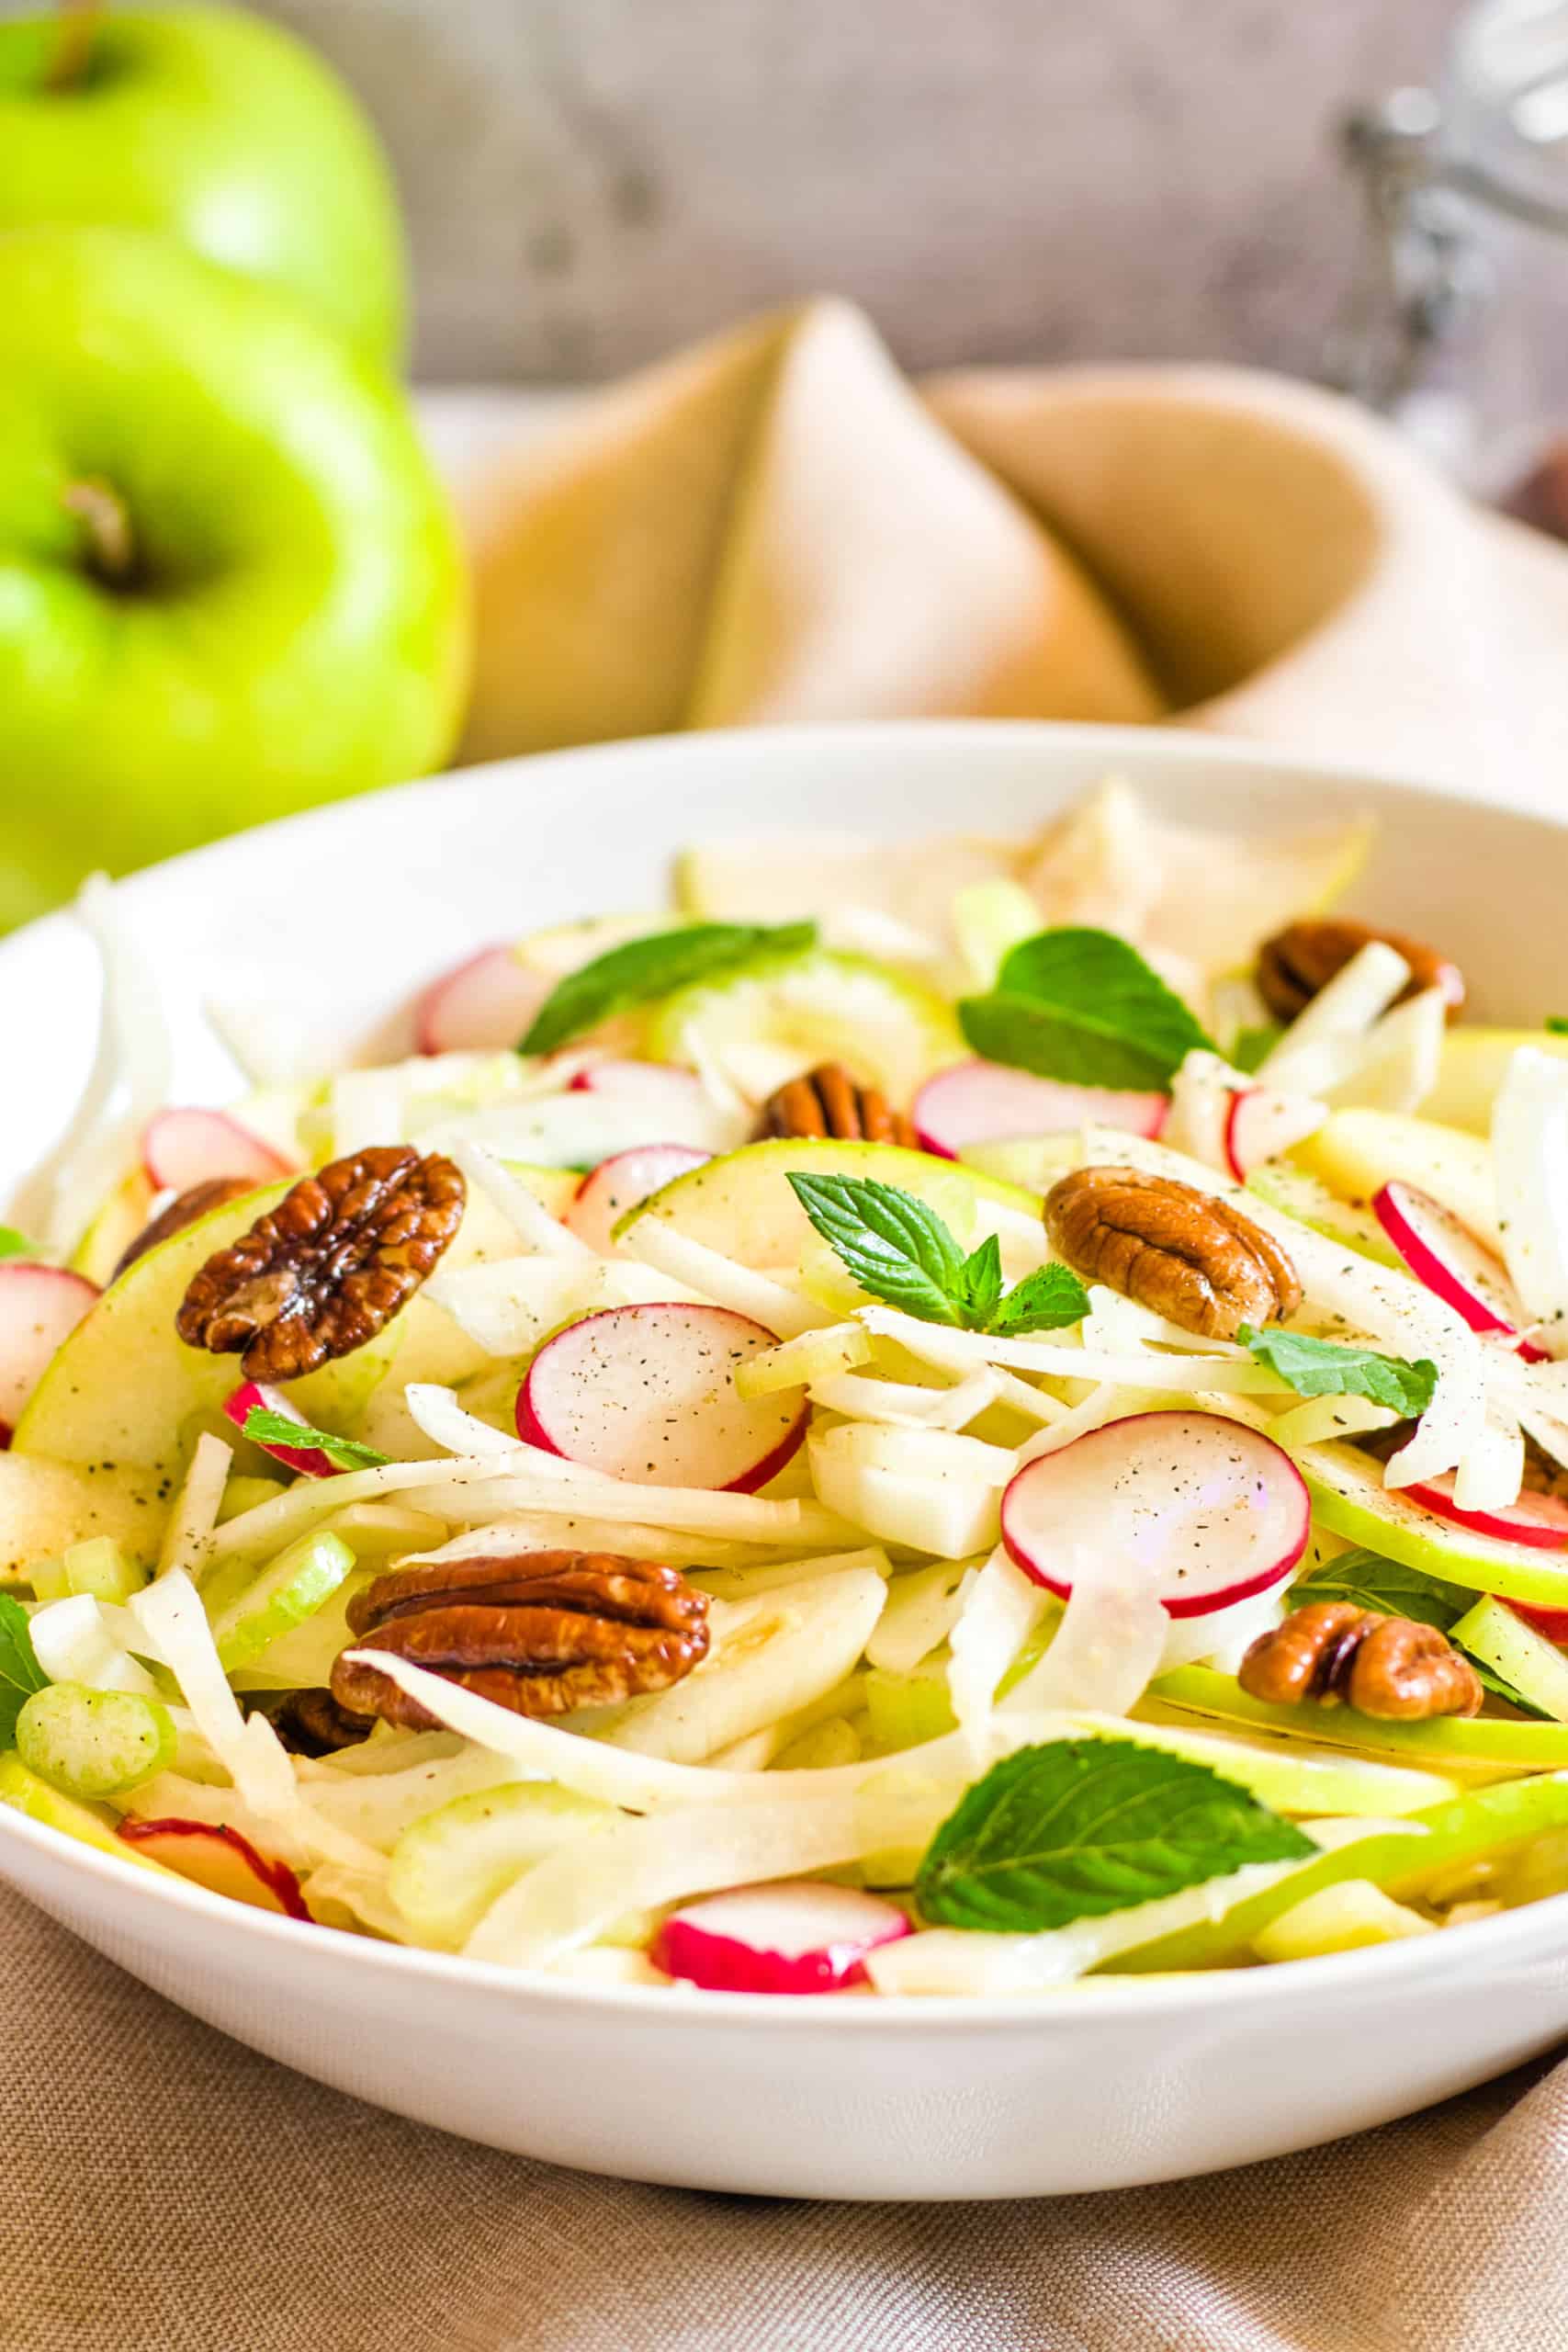 Fennel and apple salad in a white bowl.